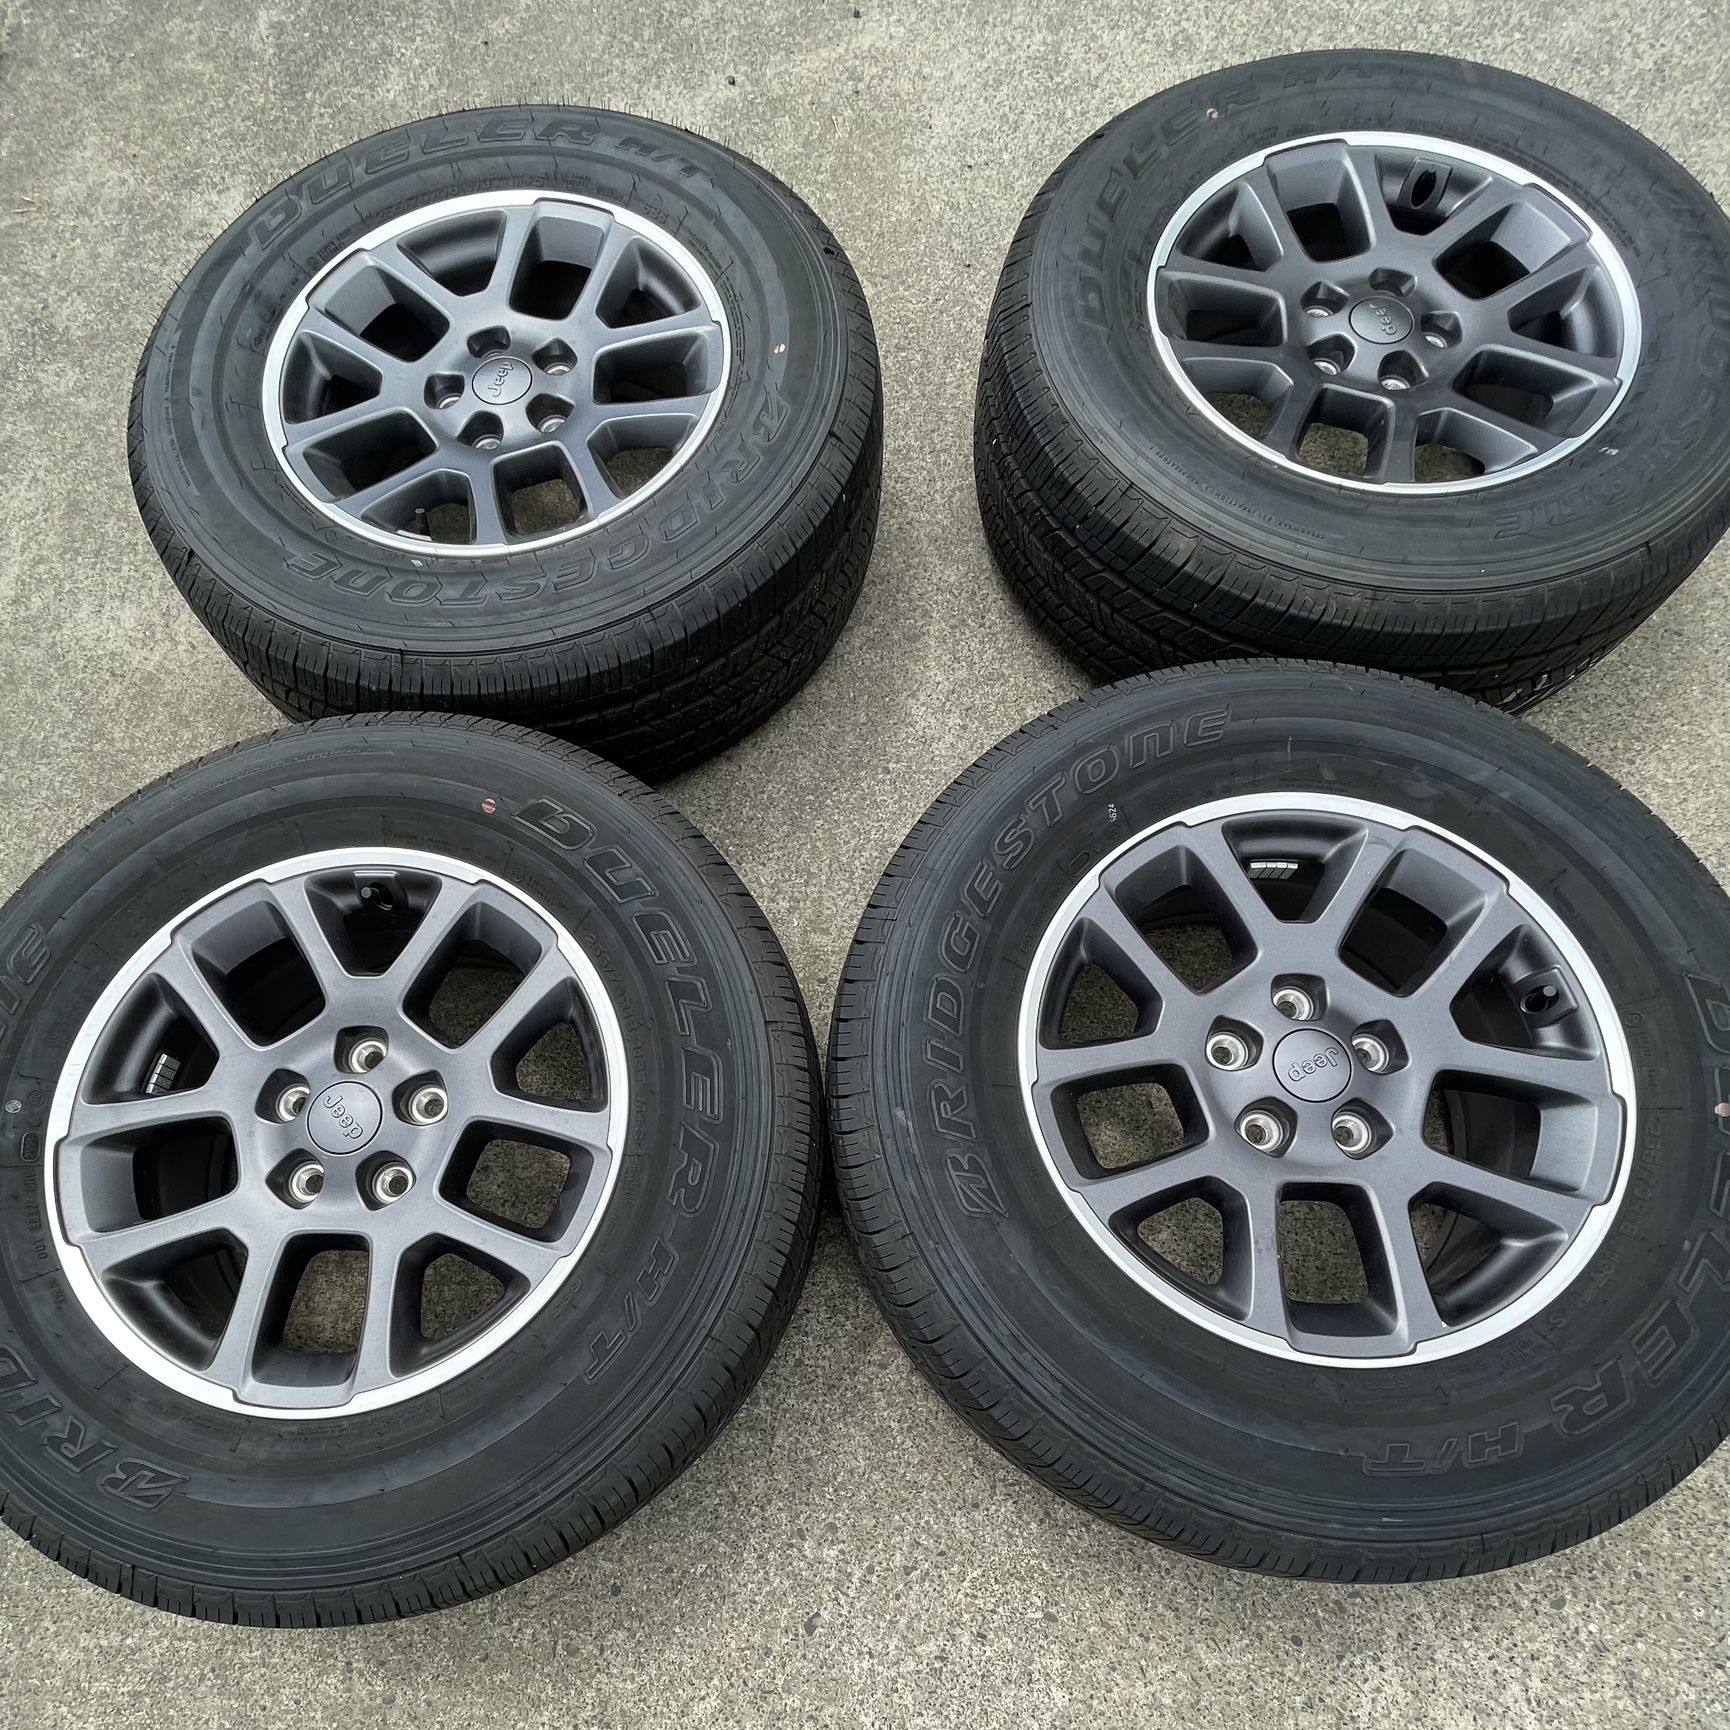 *BRAND NEW*  Jeep wheels and tires  225/70 R18